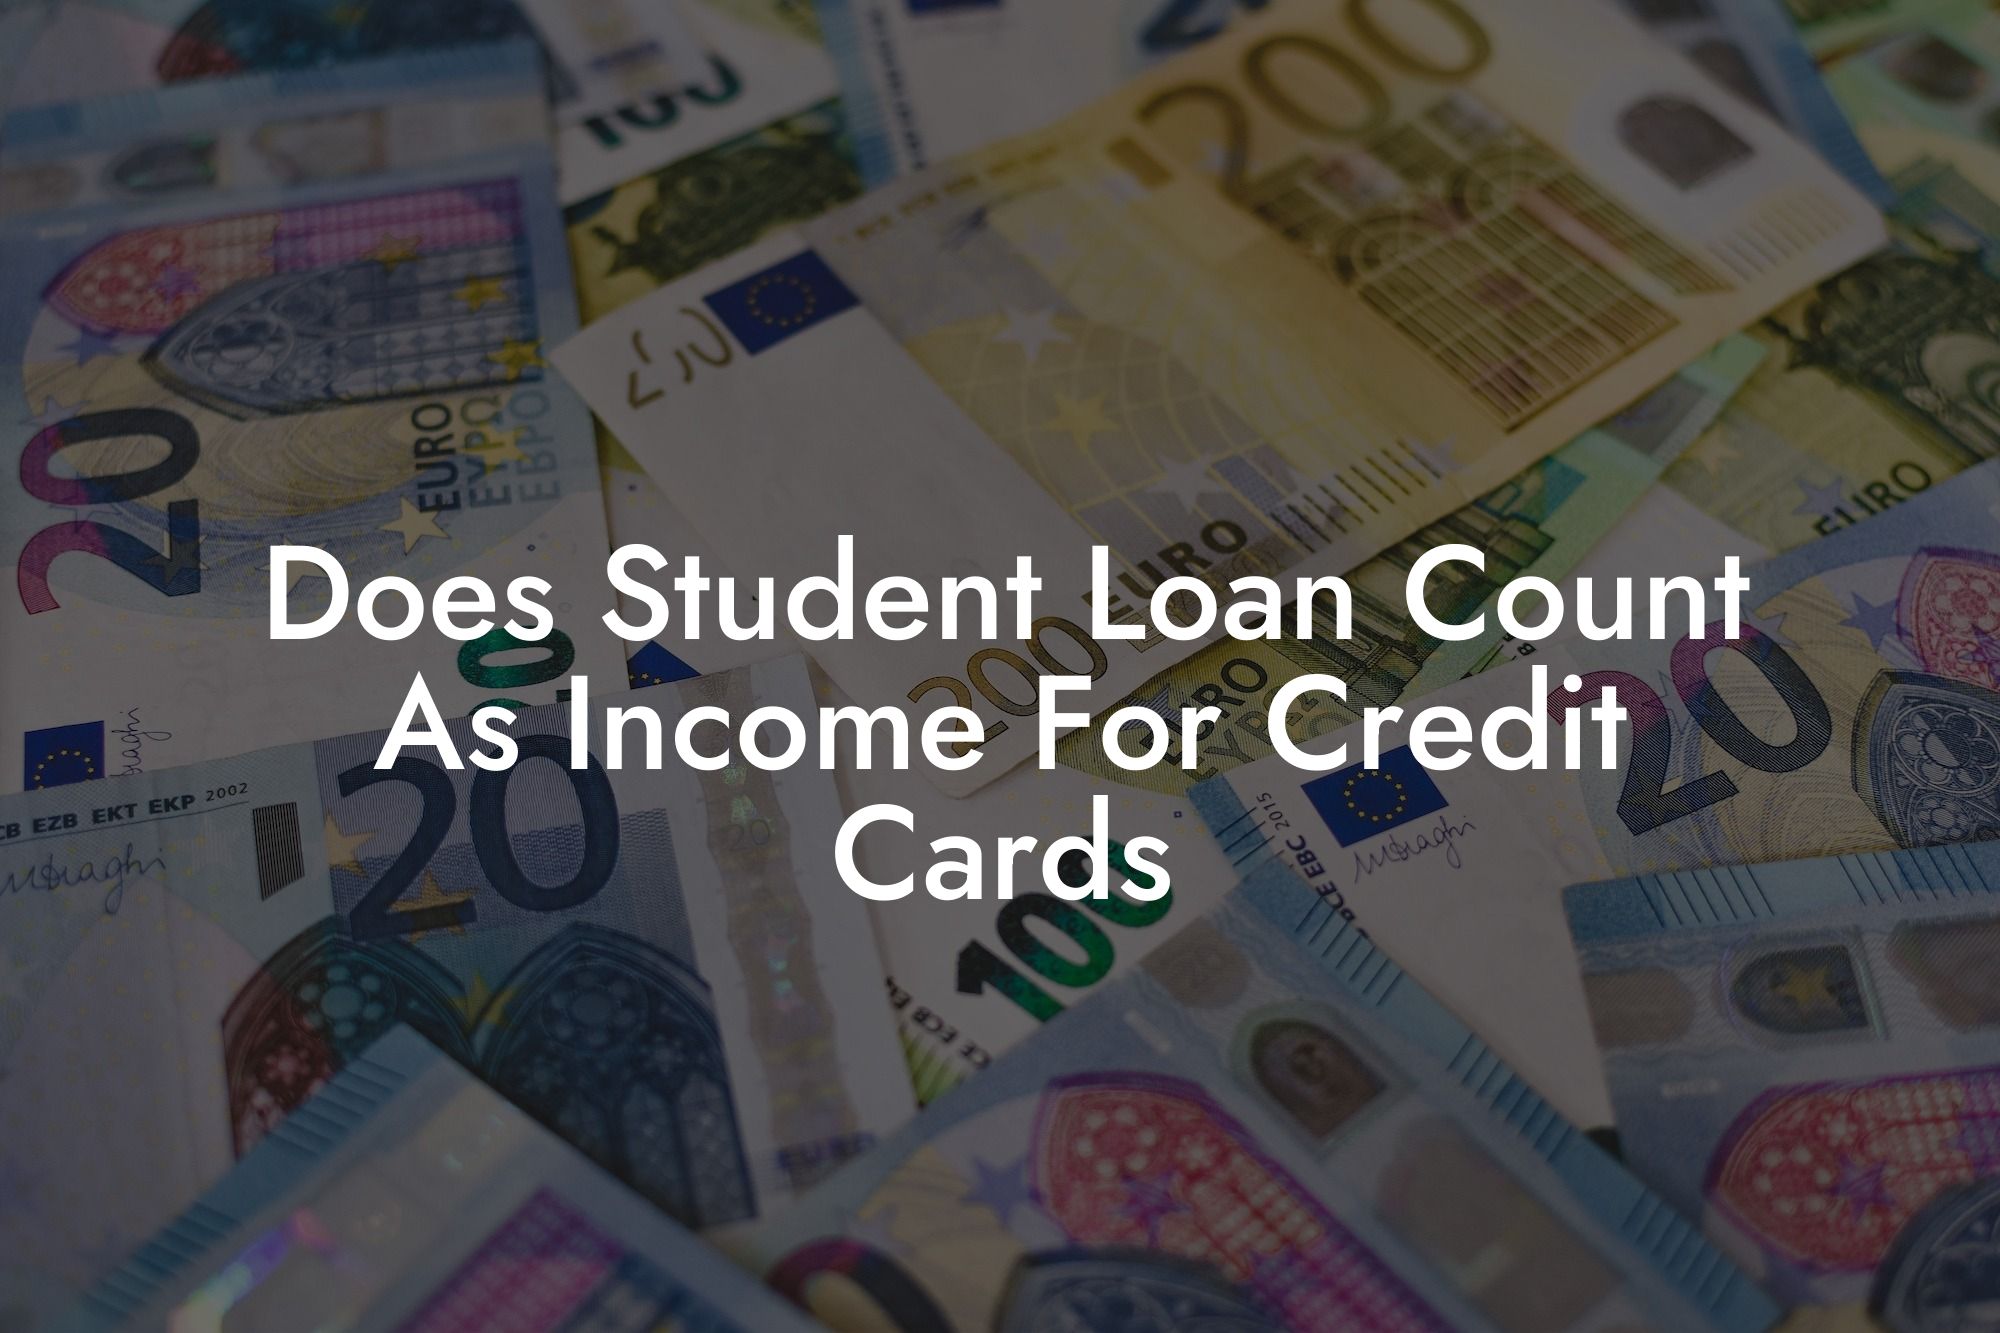 Does Student Loan Count As Income For Credit Cards